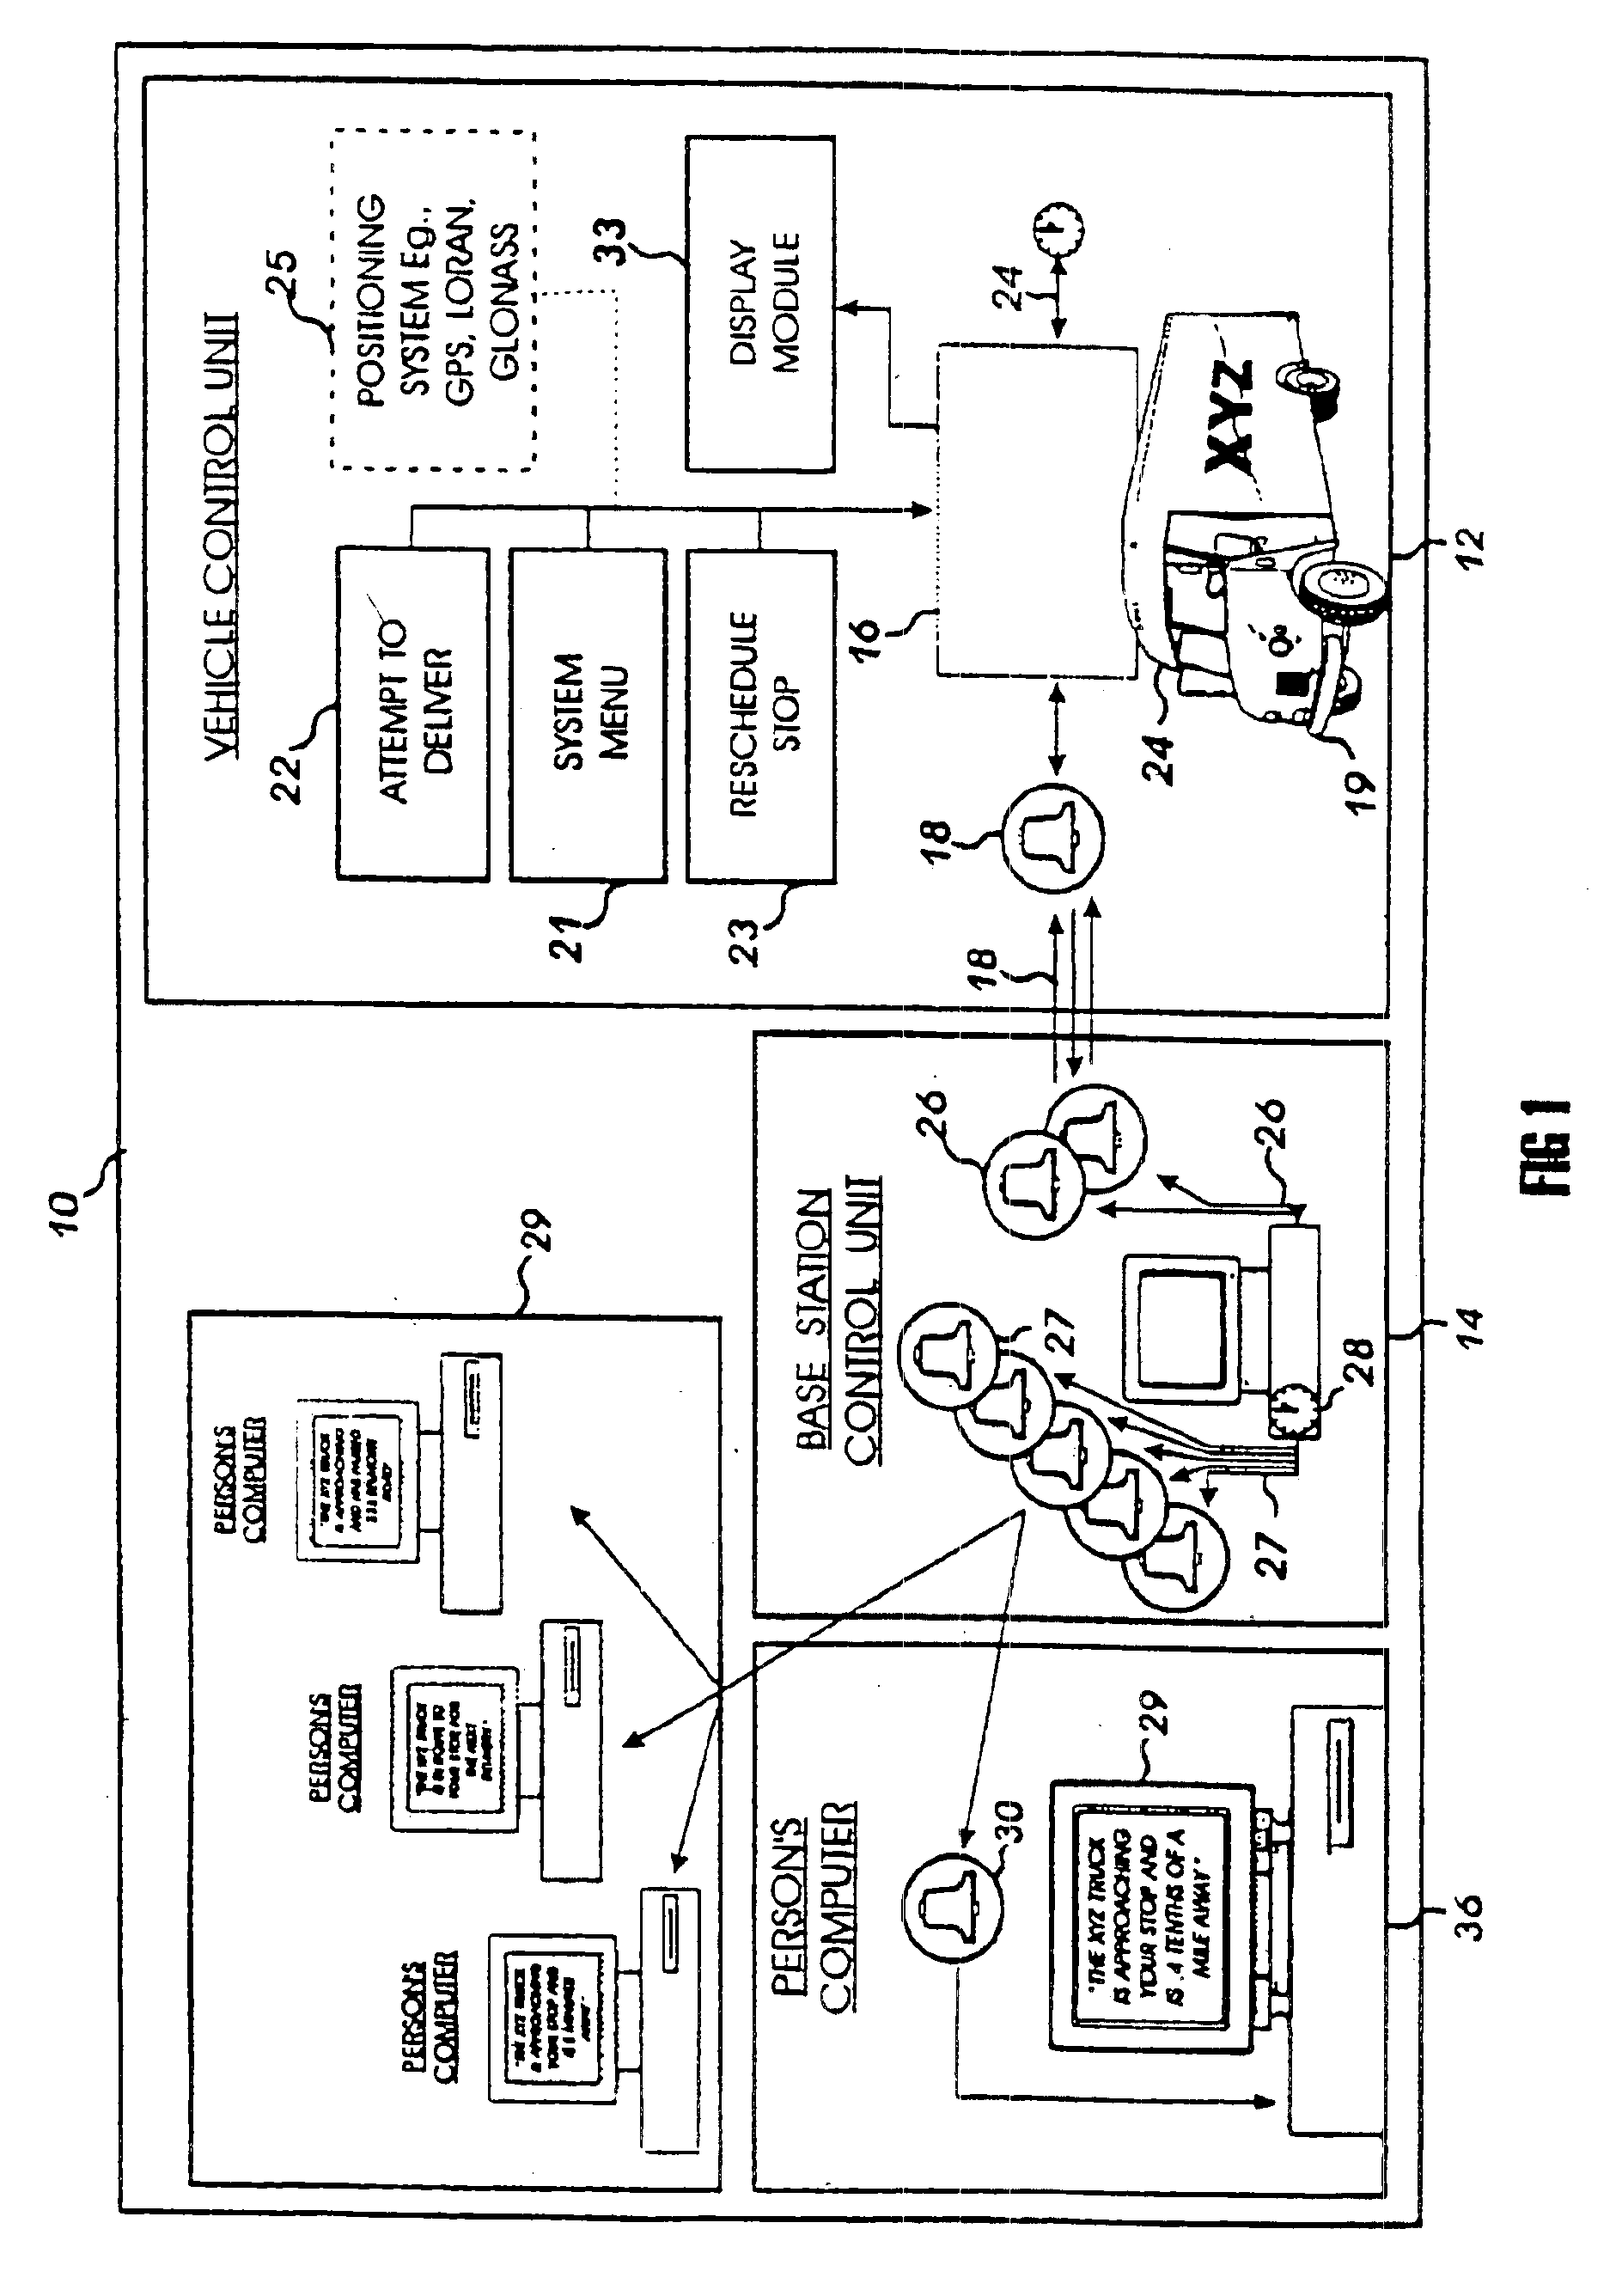 Notification systems and methods with notifications based upon prior package delivery